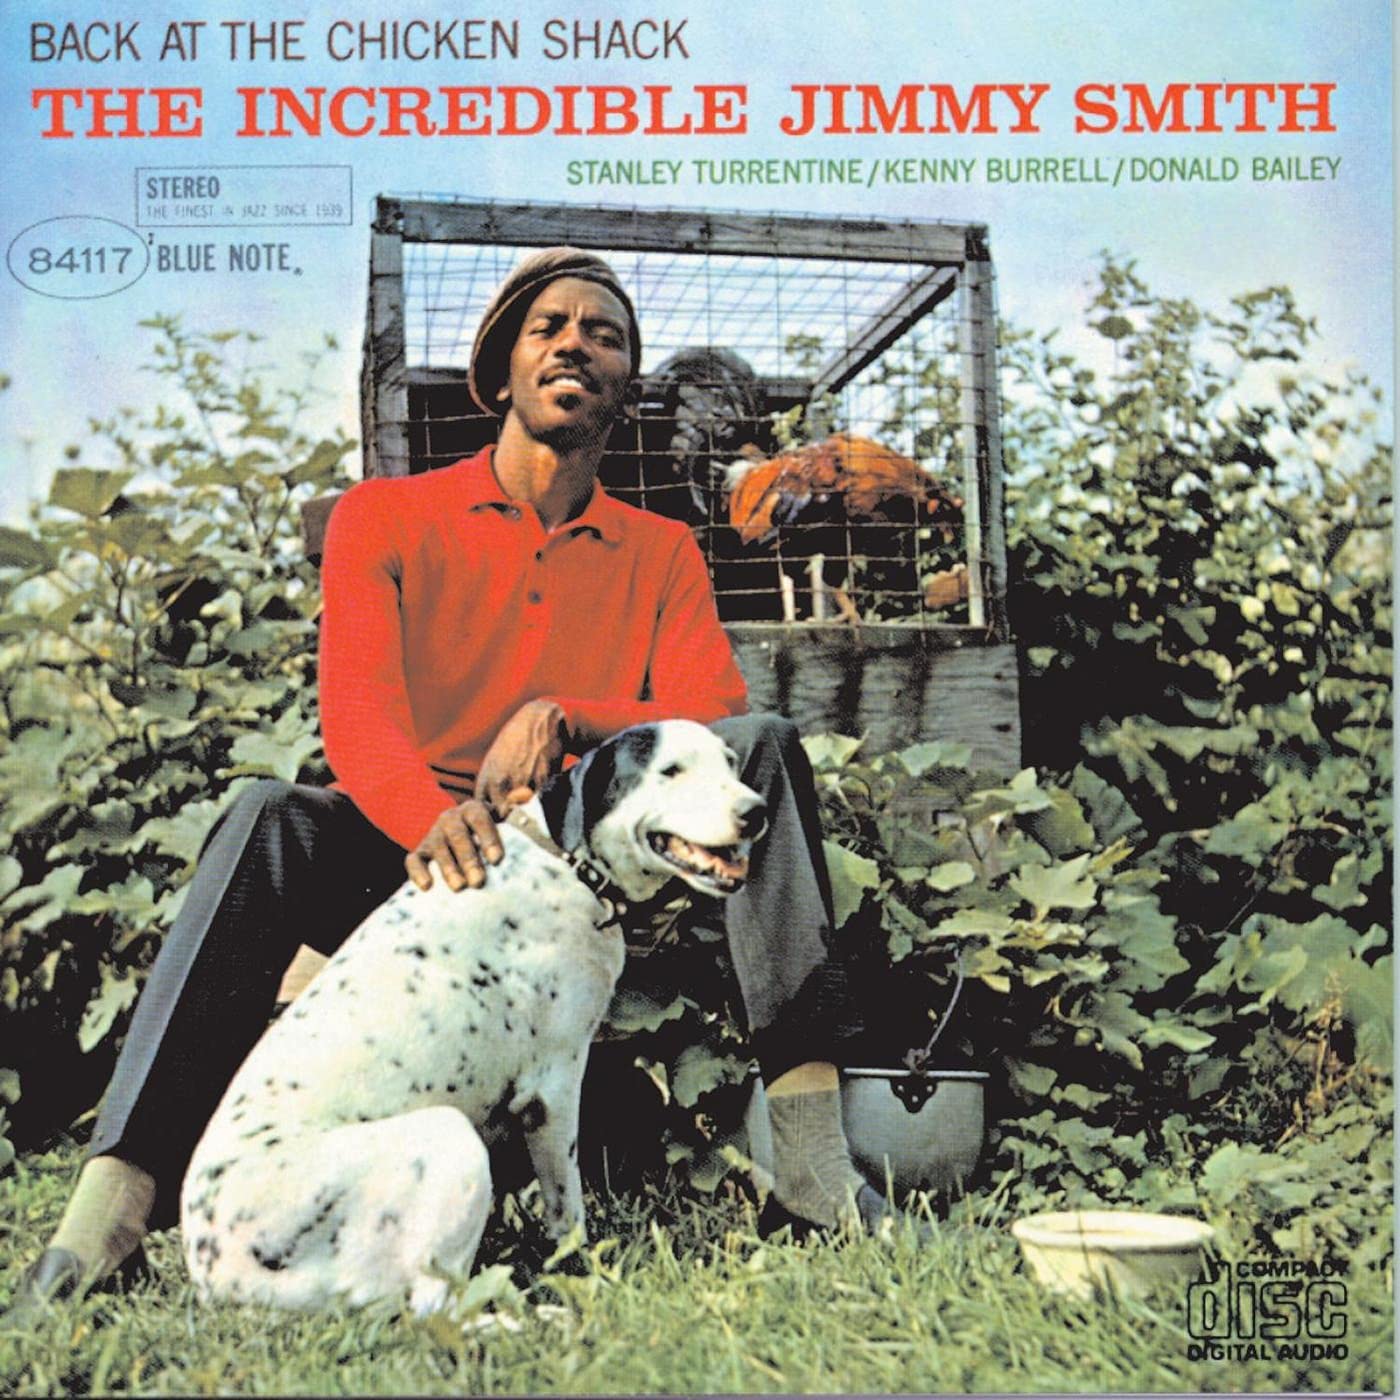 JIMMY SMITH - Back At The Chicken Shack (Blue Note Classic Vinyl Remastered Edition) - LP - 180g Vinyl